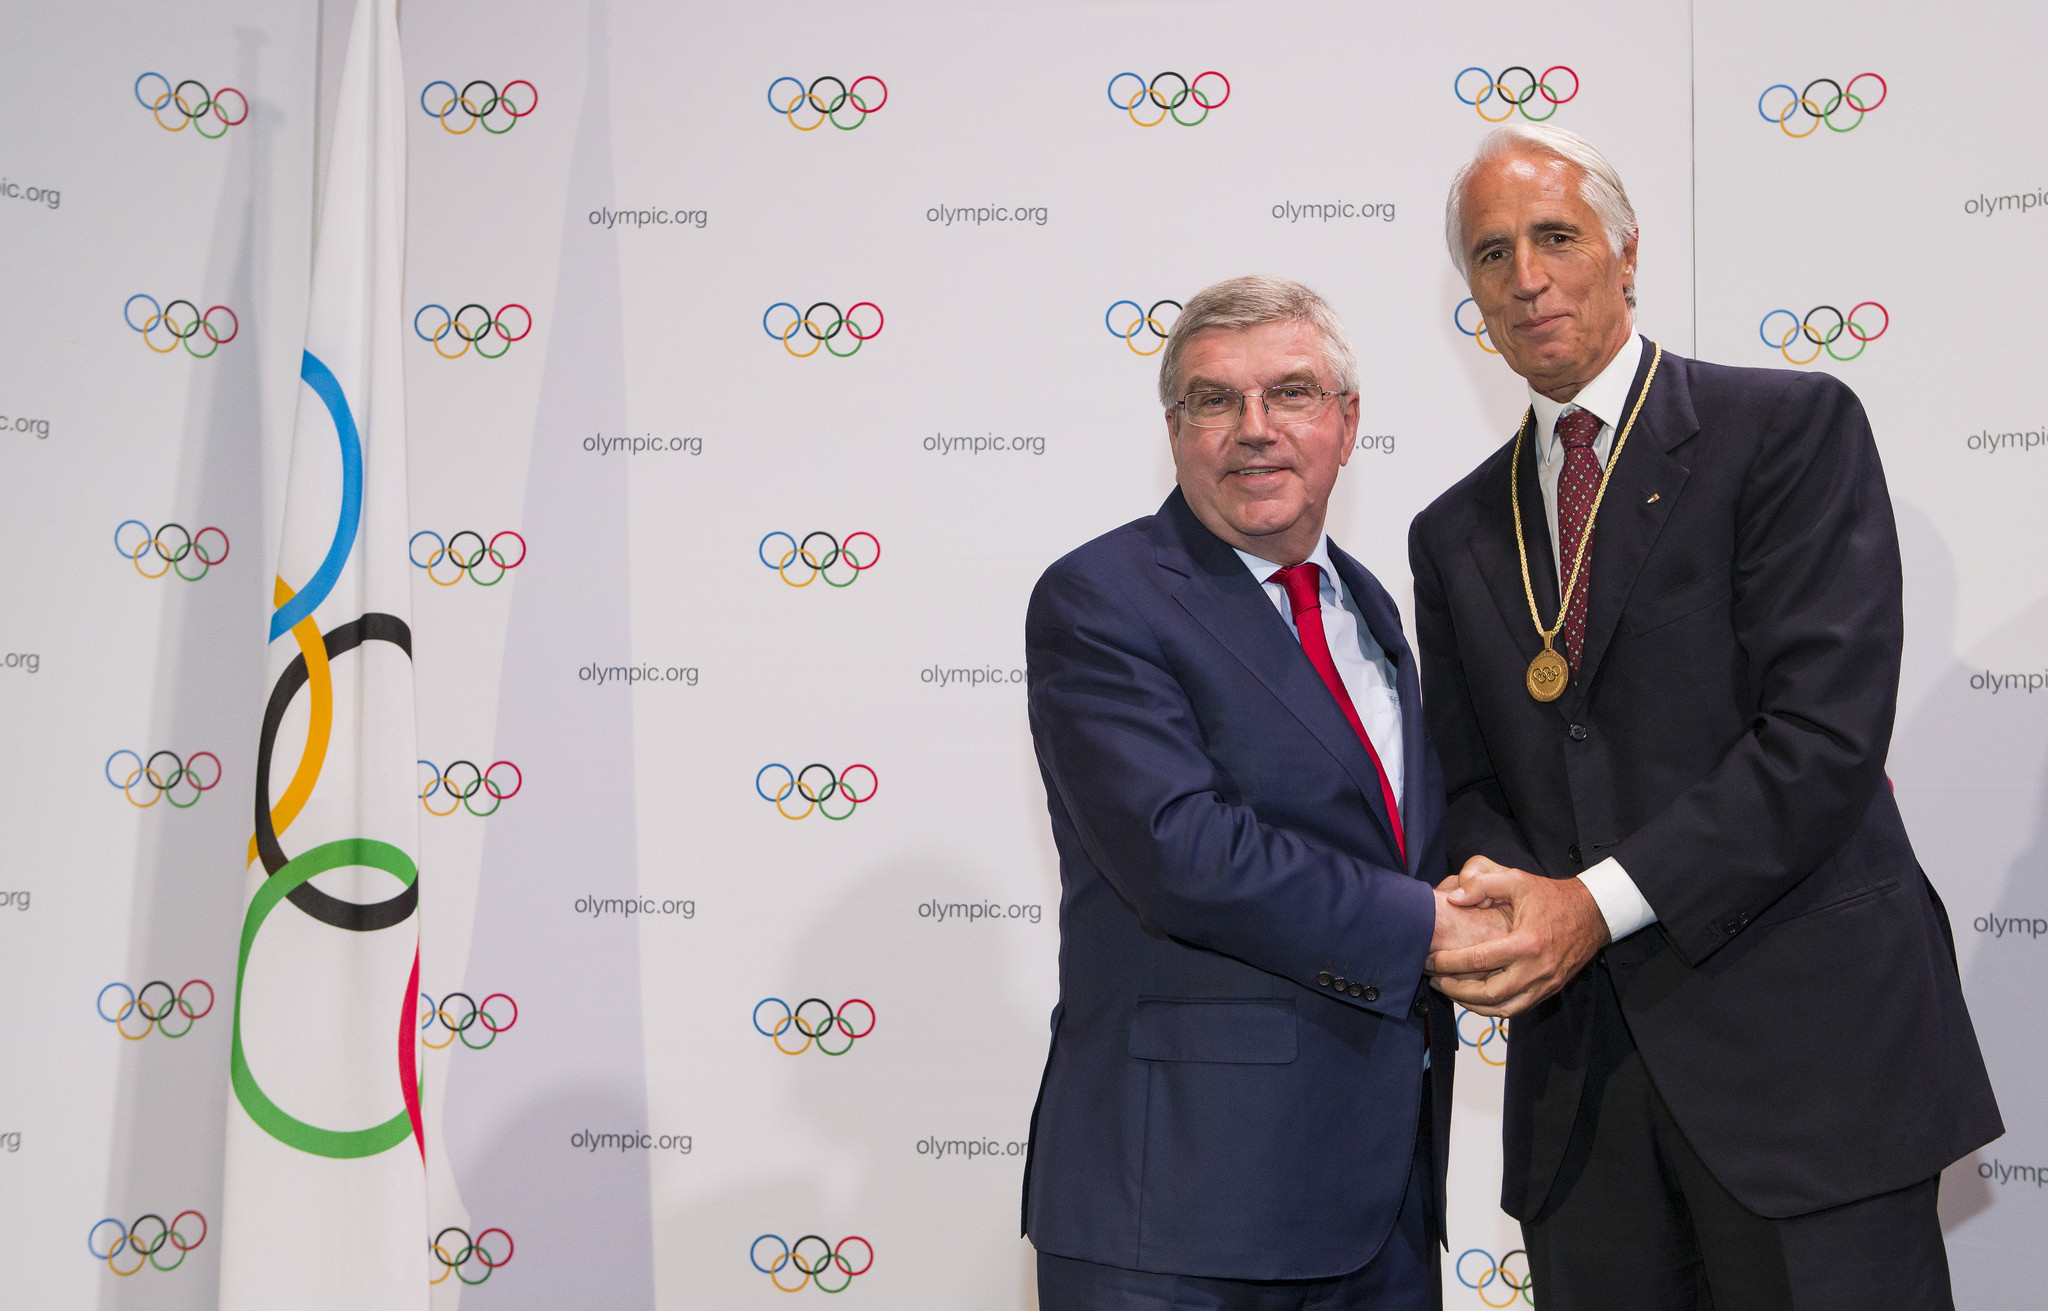 Milan-Cortina d'Ampezzo was approved as a candidate for the Games on the same day Italian National Olympic Committee head Giovanni Malagò was made an IOC member ©IOC